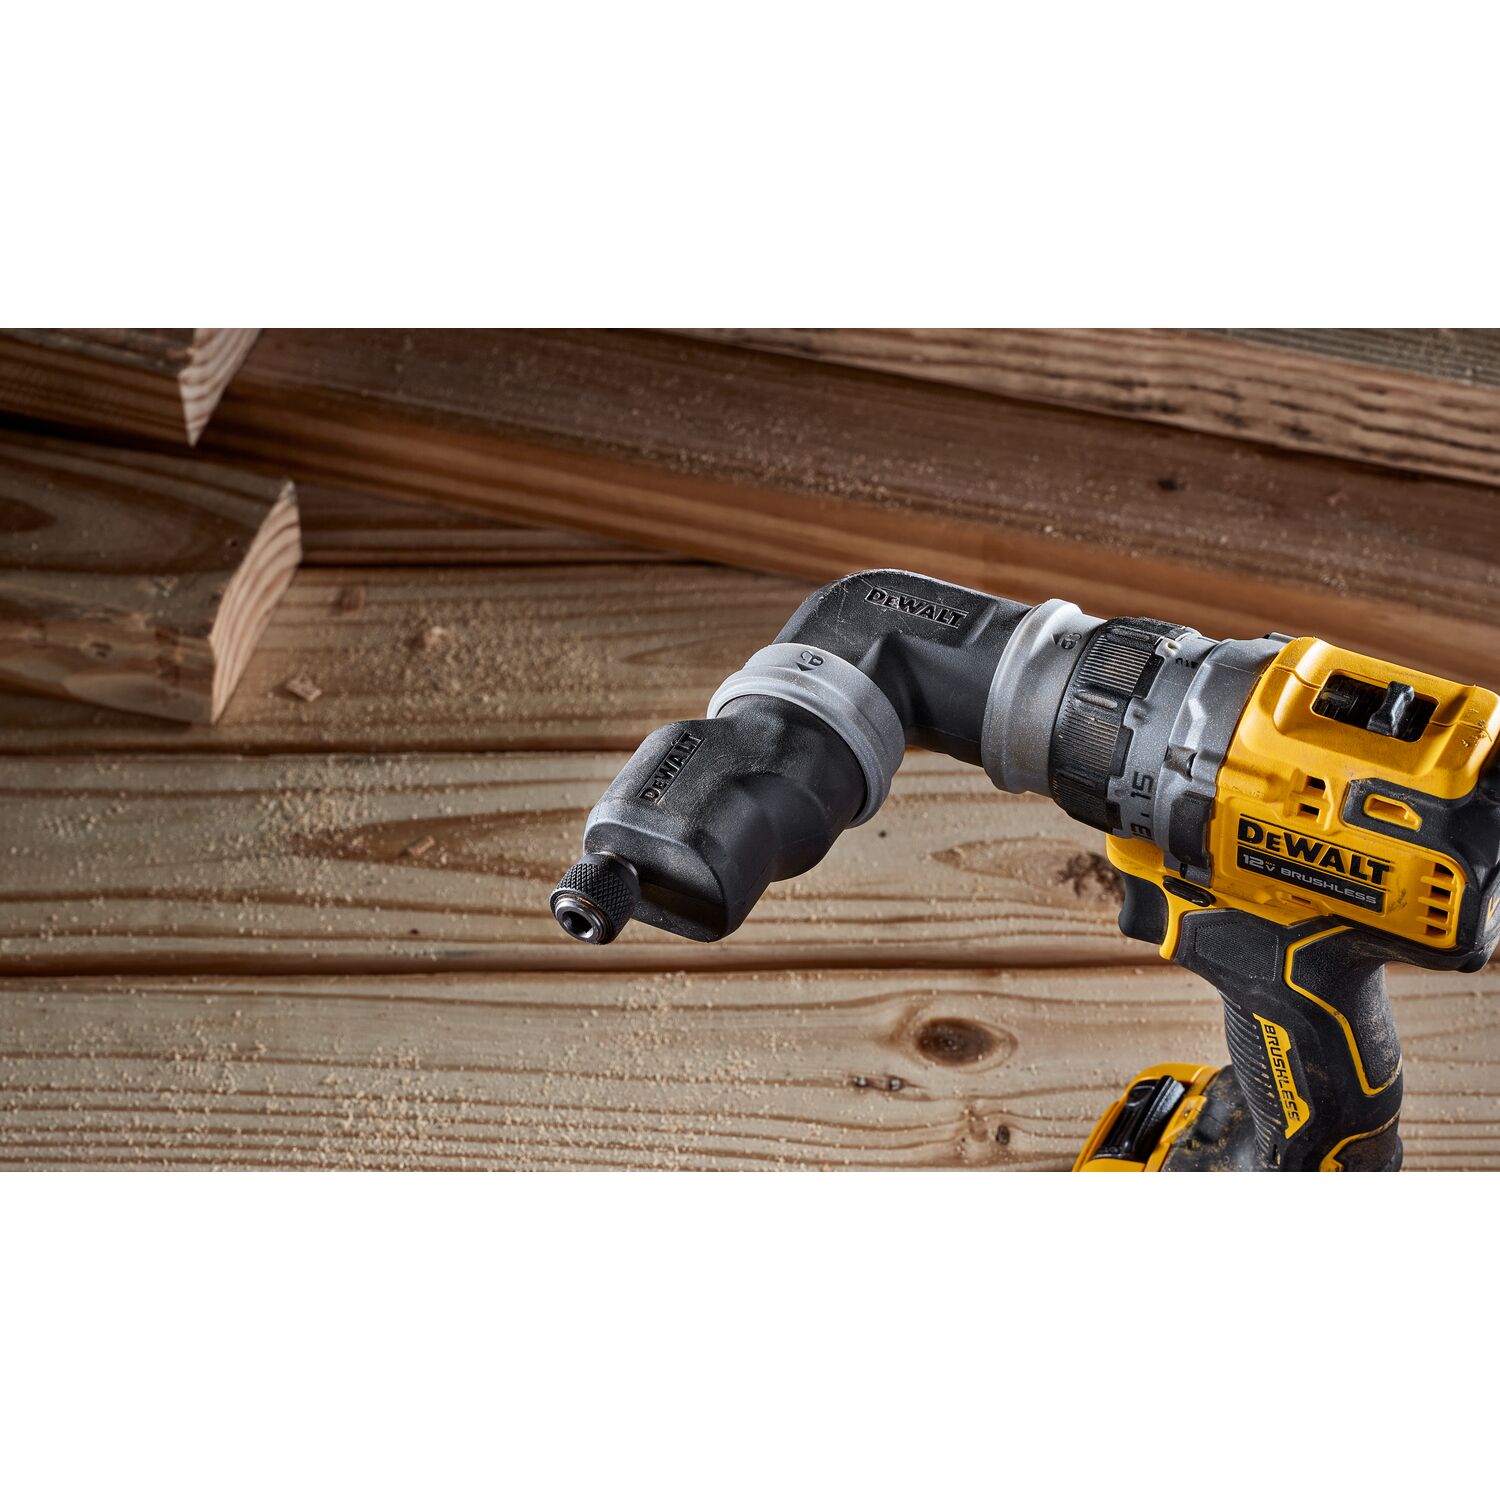 DEWALT XTREME 5-In-1 12-volt Max 3/8-in Brushless Cordless Drill